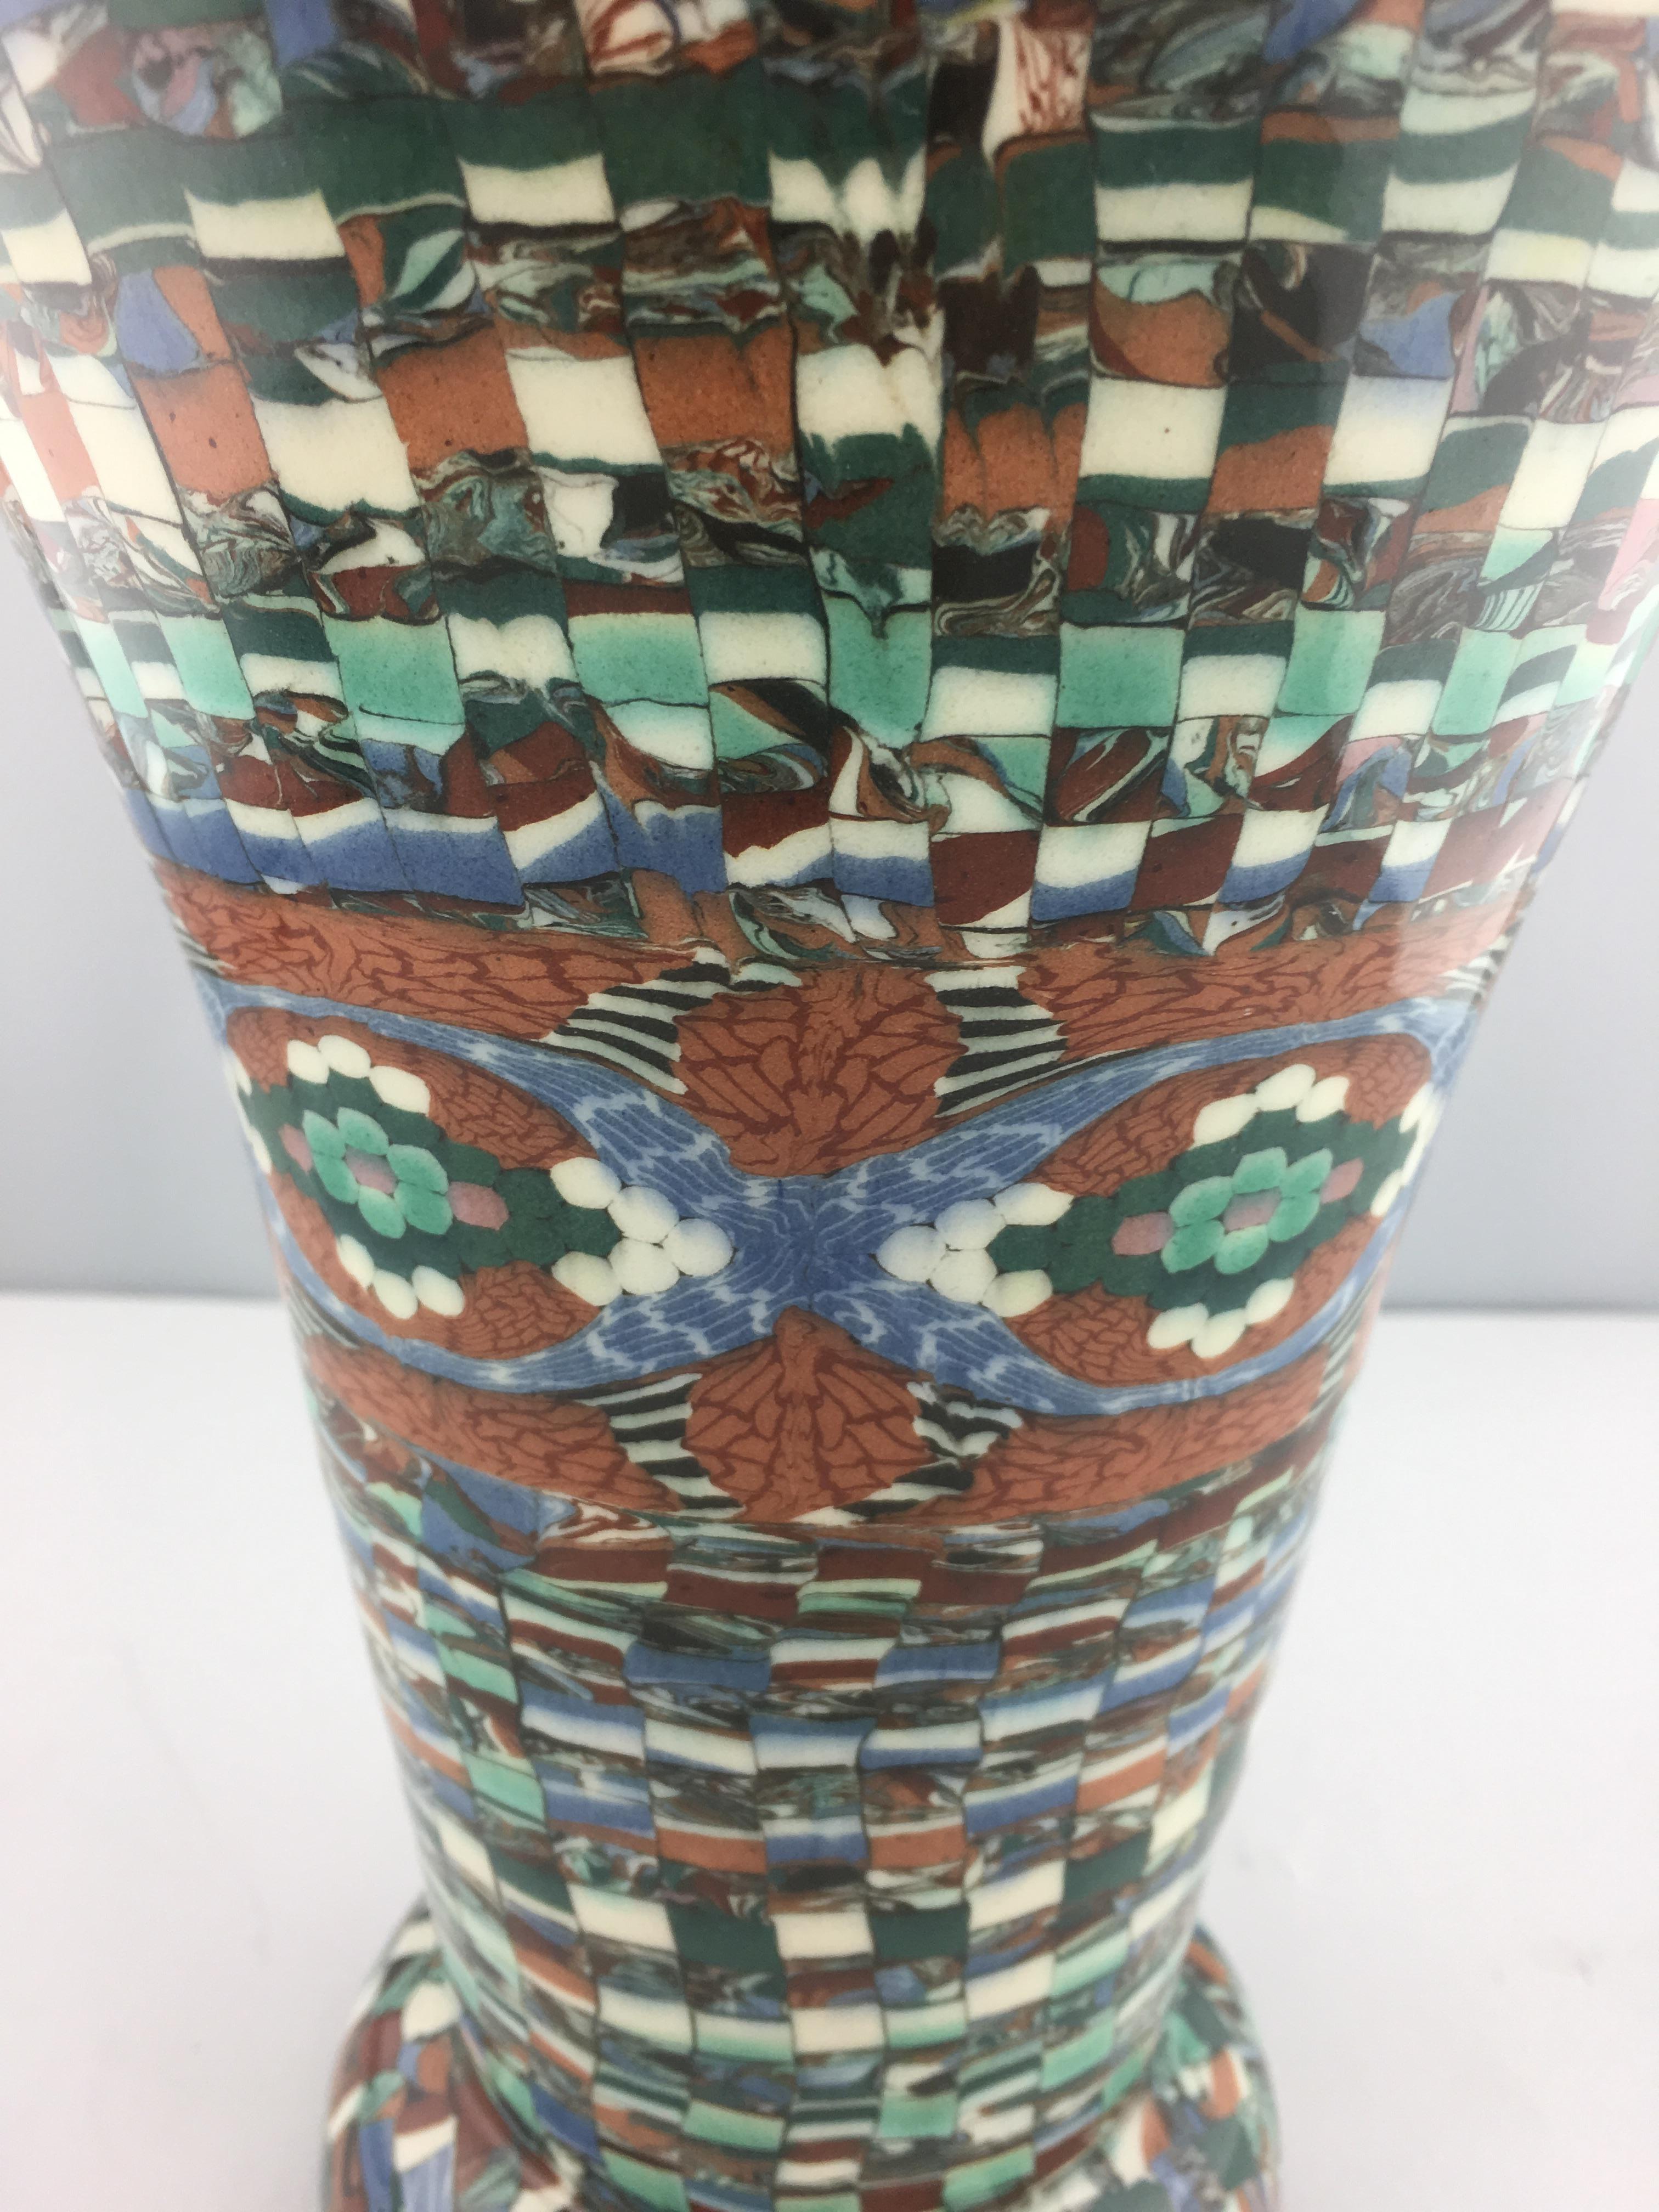 Jean Gerbino (1876-1966) mosaique ceramic vase
Art pottery 
Vallauris, France, early 20th century. 

The body of this beautiful vase with multicolored 